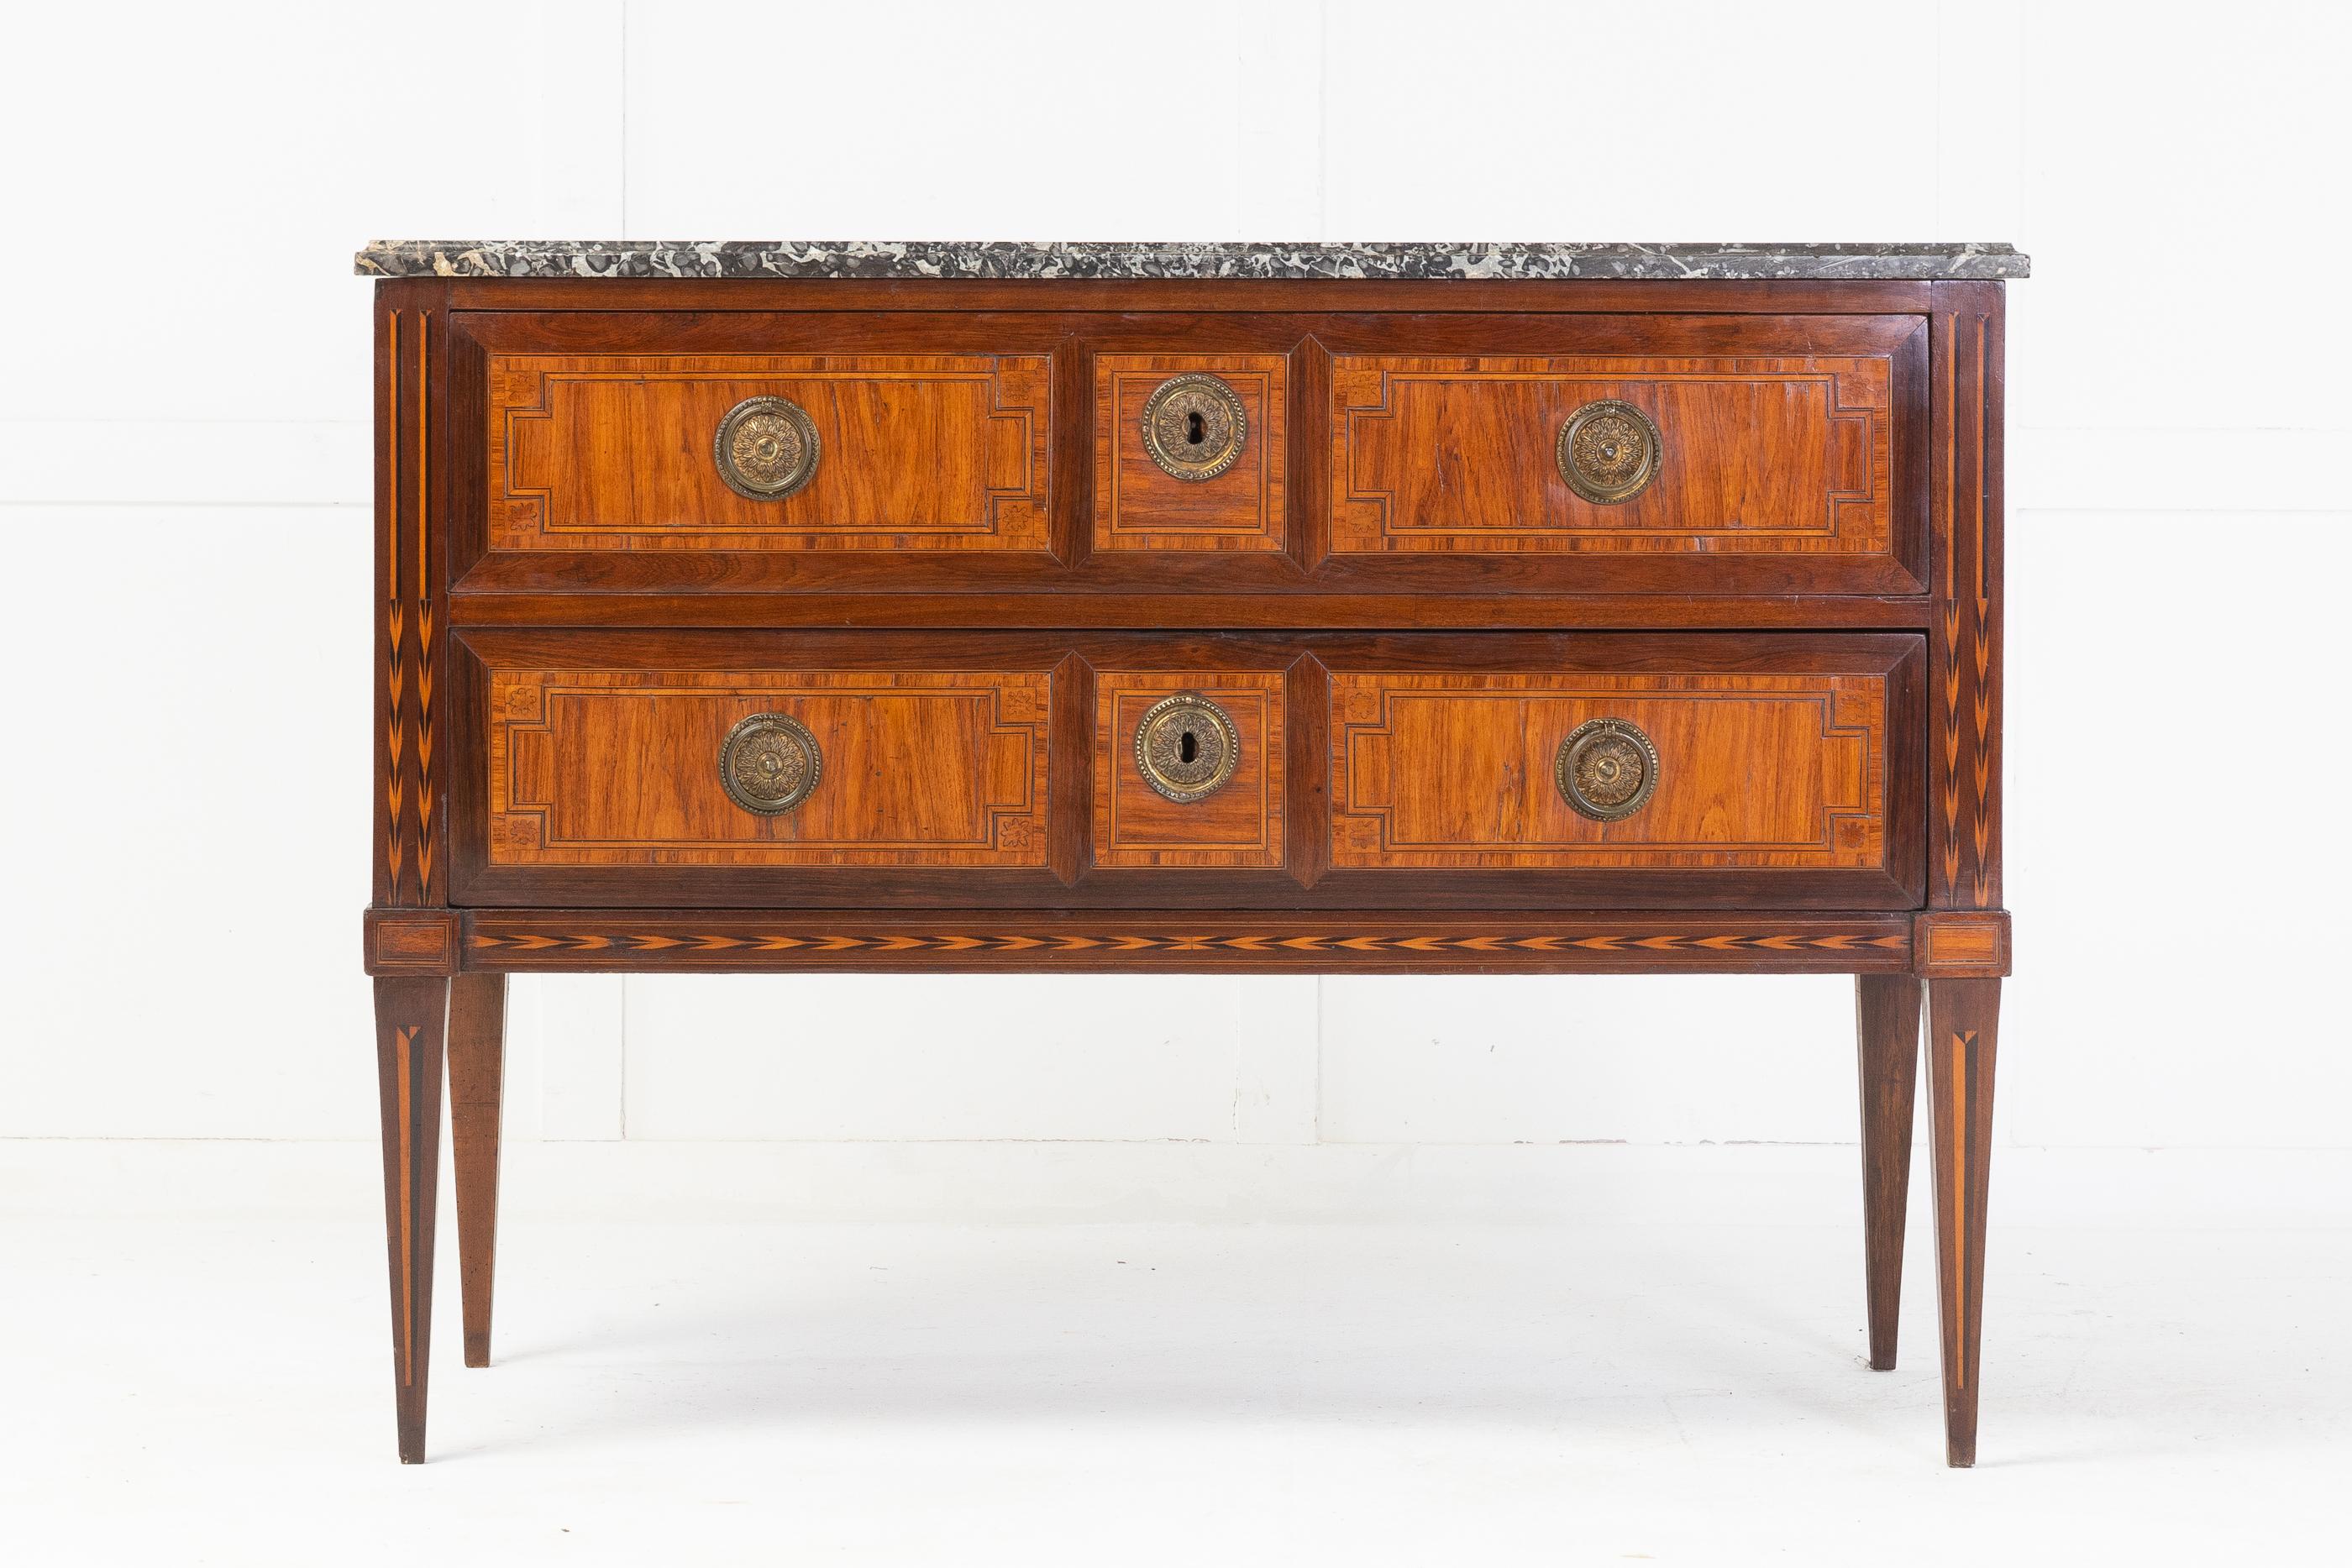 18th century French king wood and tulip wood commode. A very good proportioned and nicely balanced inlaid commode with original medallion handles. Having marquetry inlay and nice marble top. Standing on inlaid and tapering legs.
 